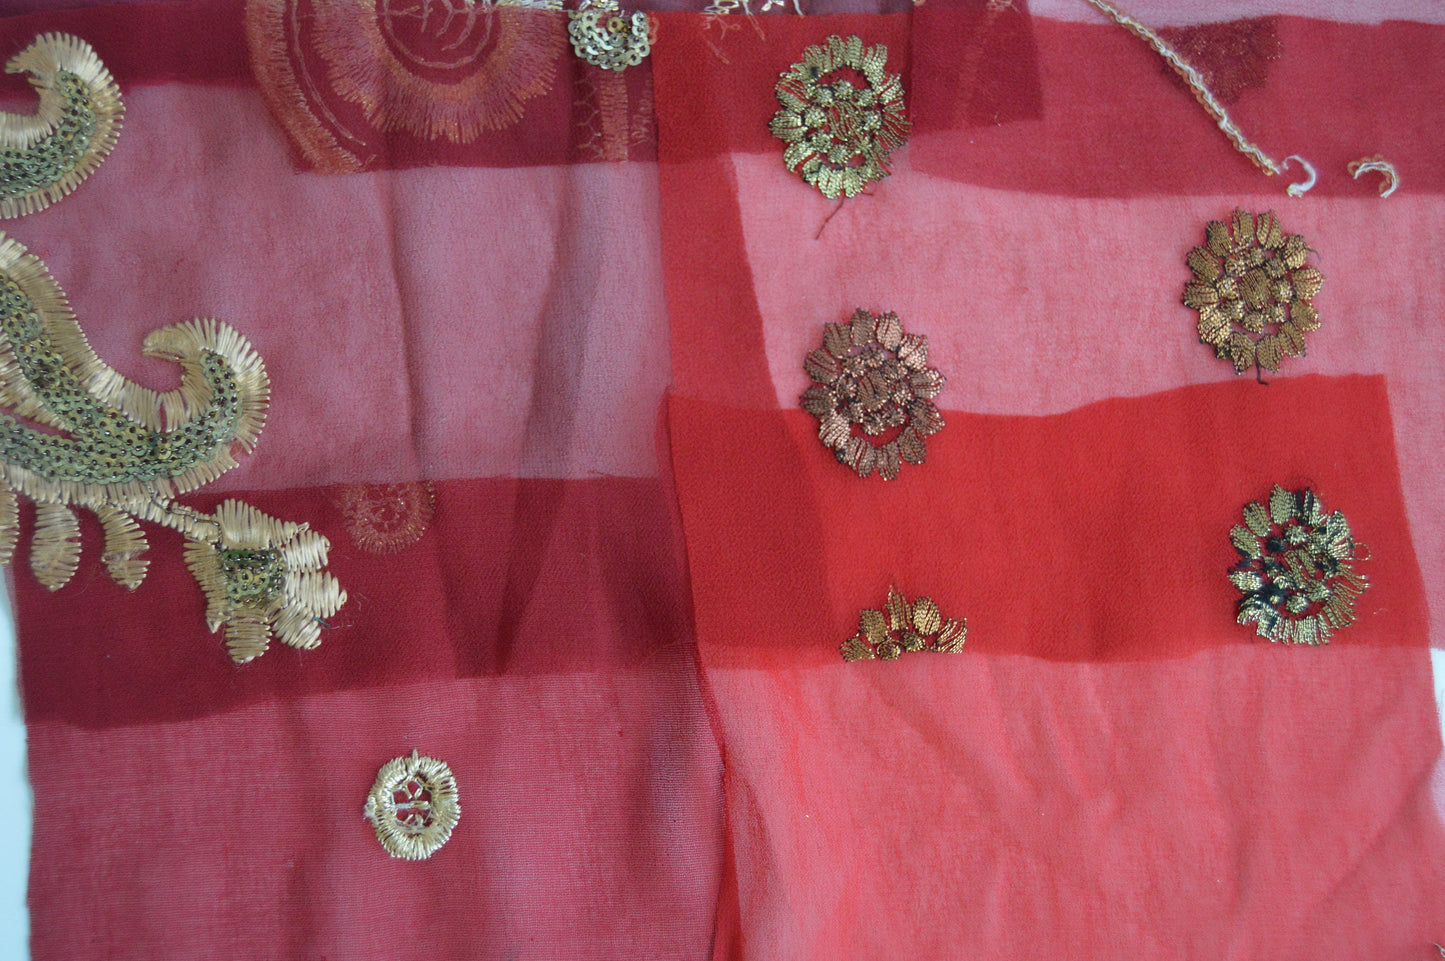 Red Assorted Embellished Sari Fabric Remnants Scraps - 10 Pieces